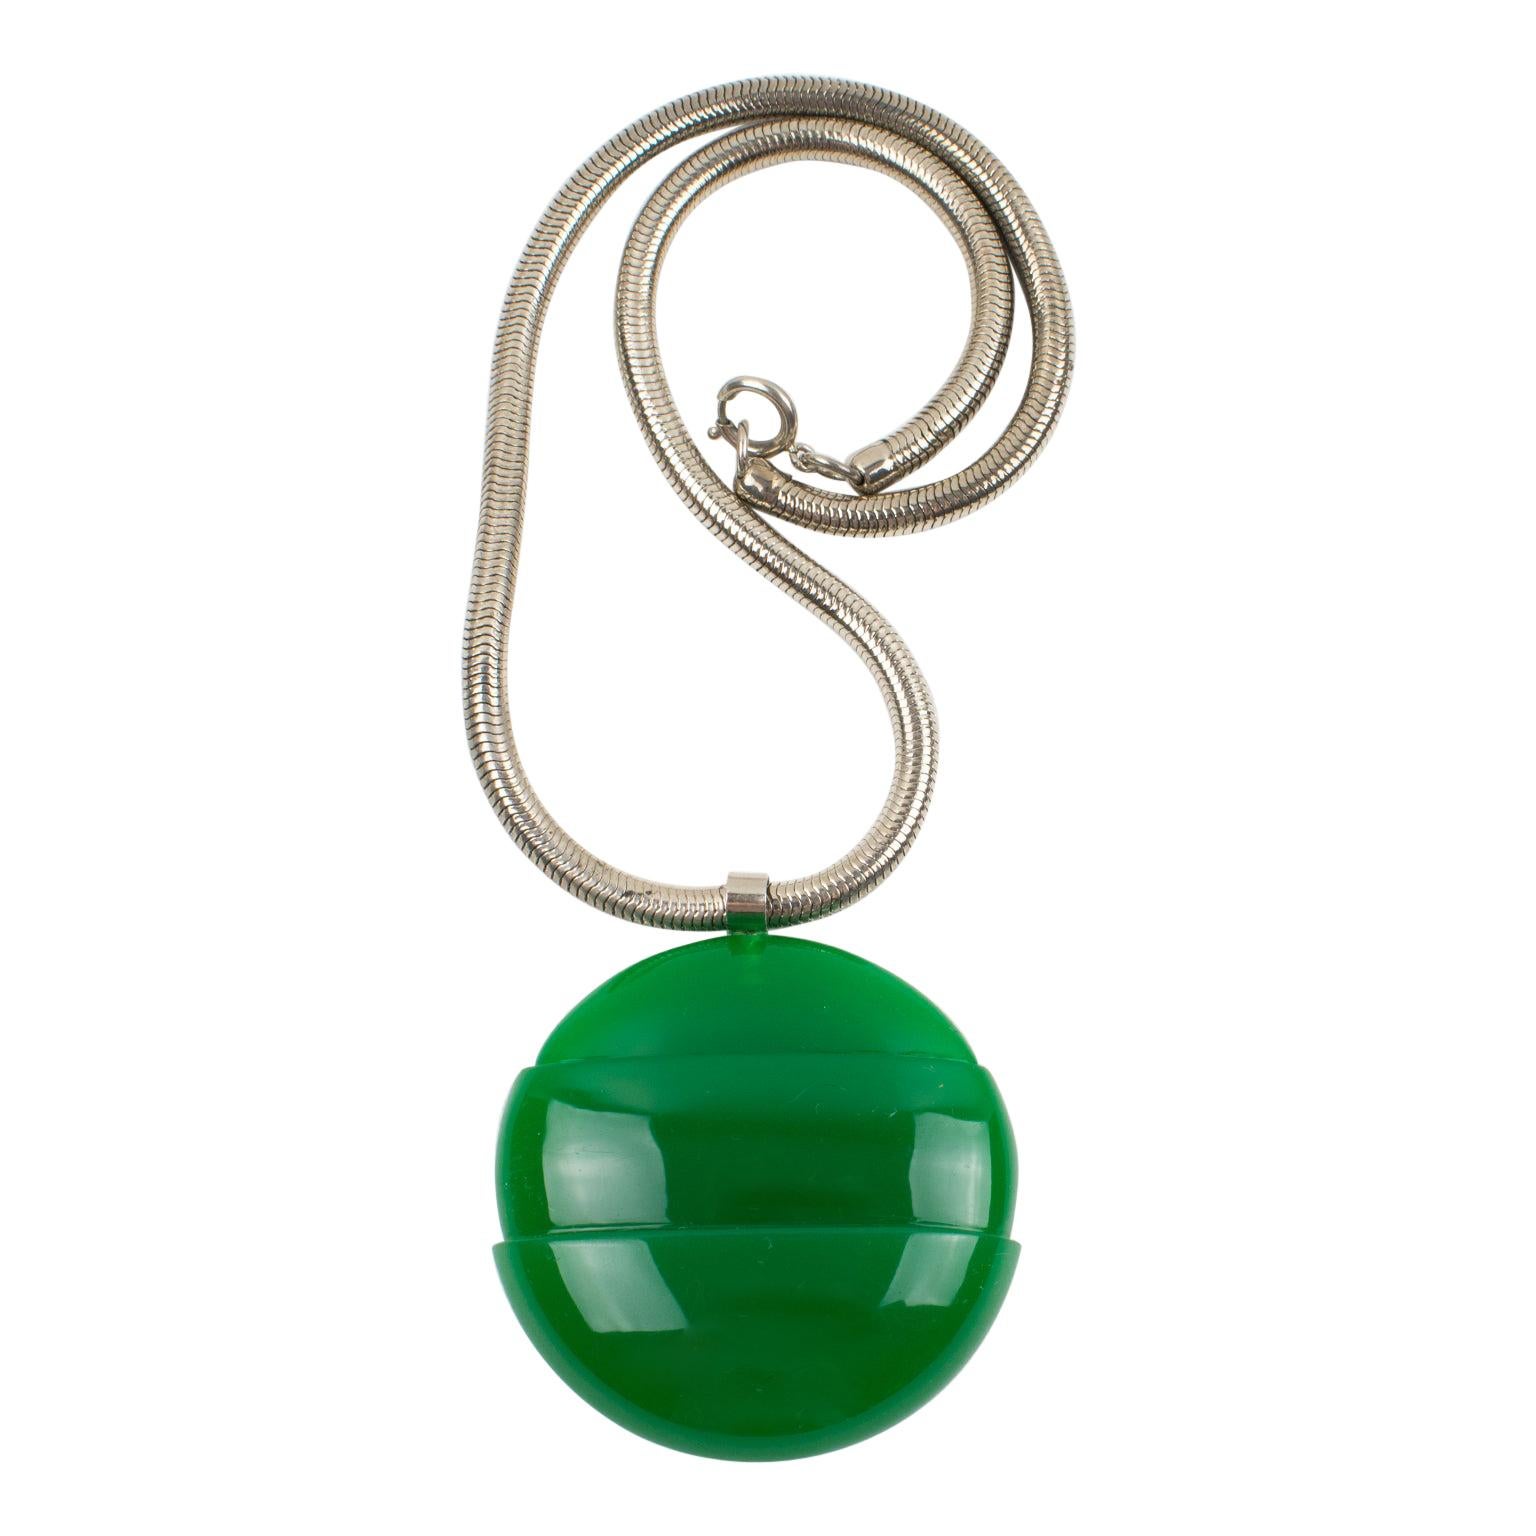 Lanvin Paris Modernist Green Lucite Medallion Necklace with Snake Chain, 1970s For Sale